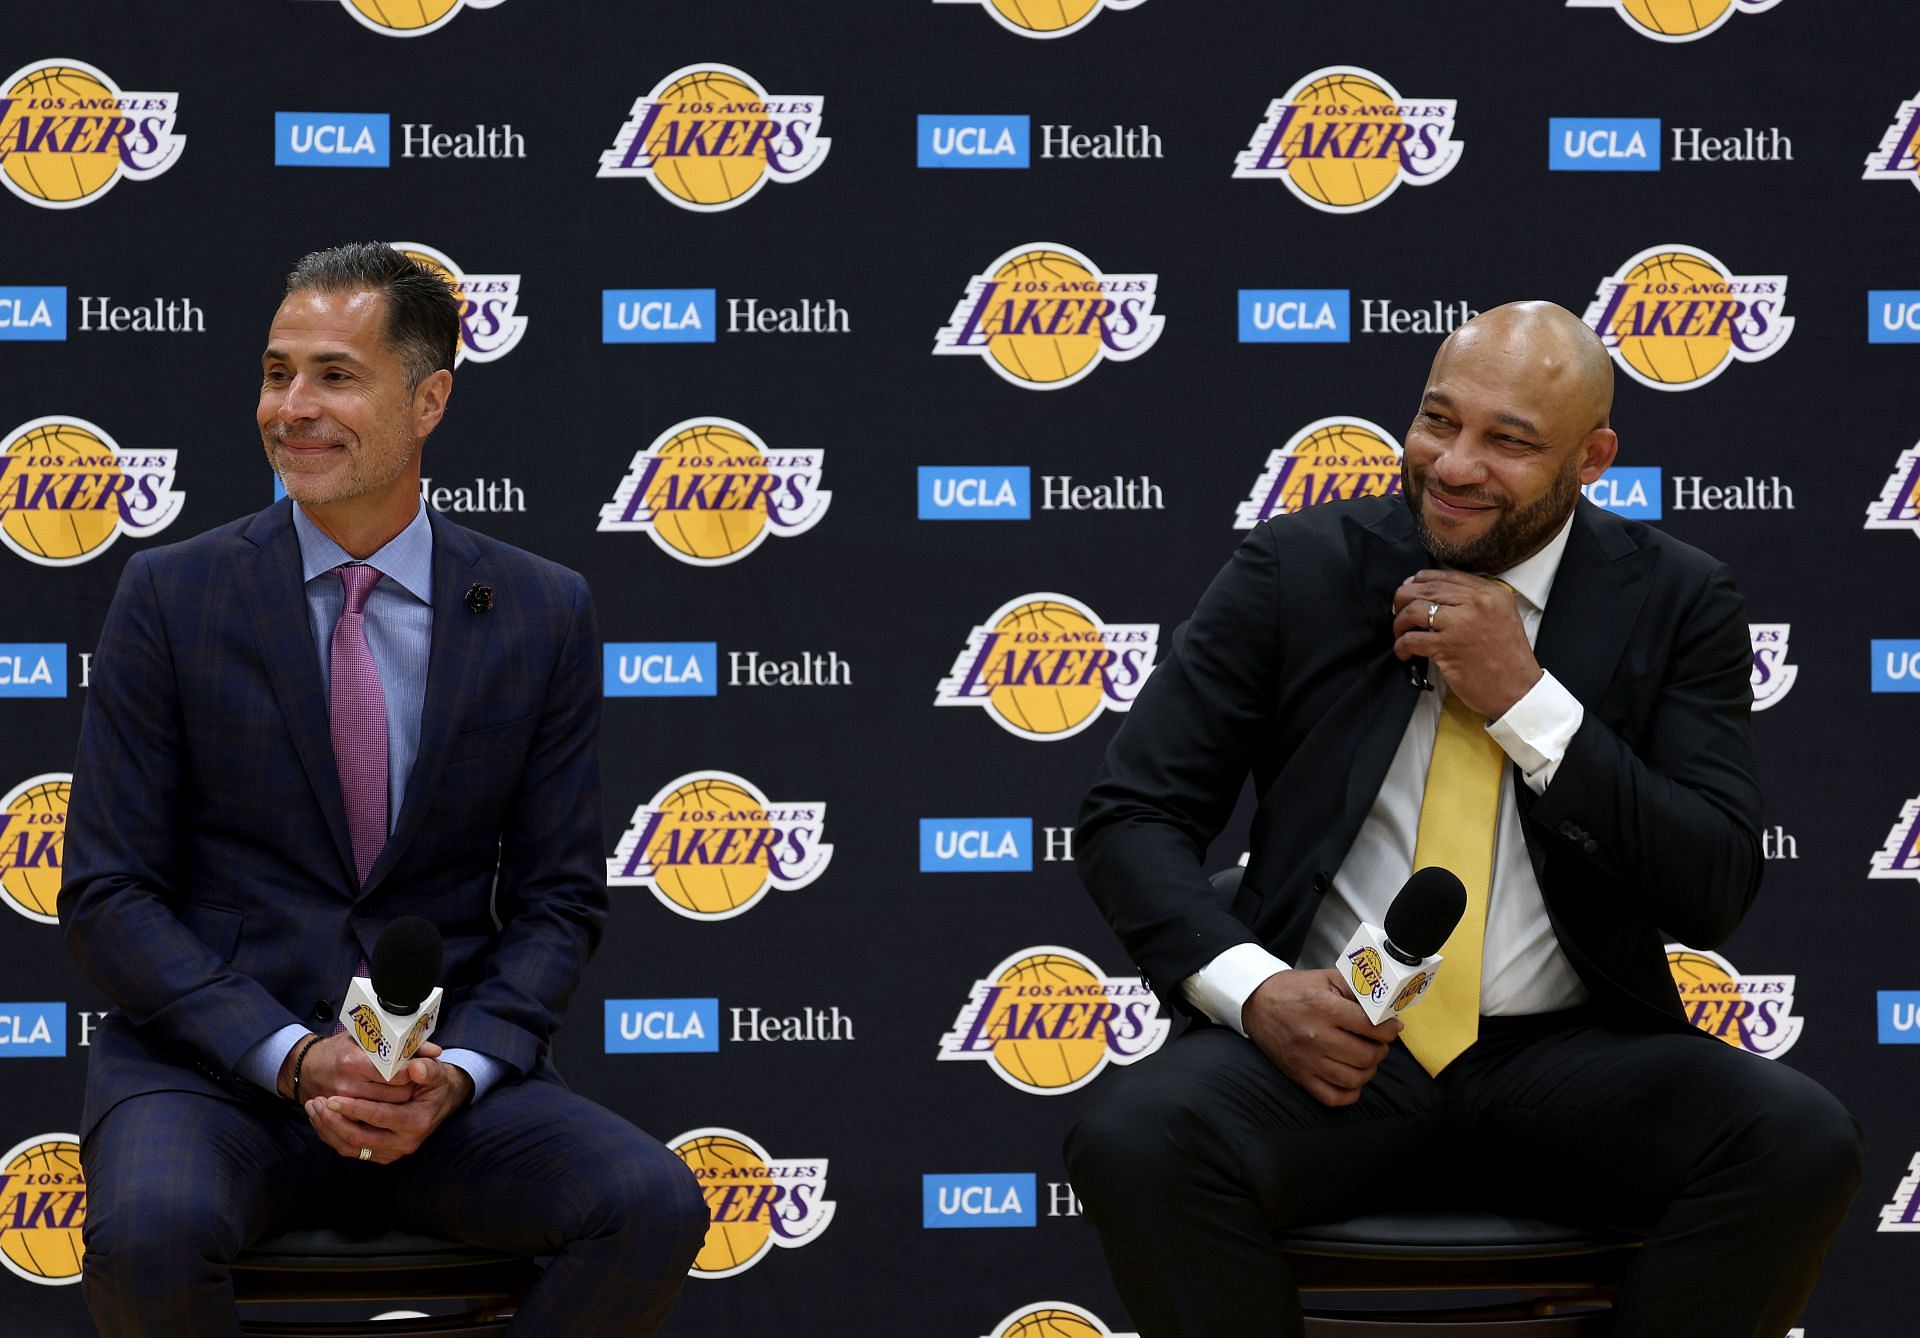 New head coach of the LA Lakers Darvin Ham and Vice President of Operations Rob Pelinka